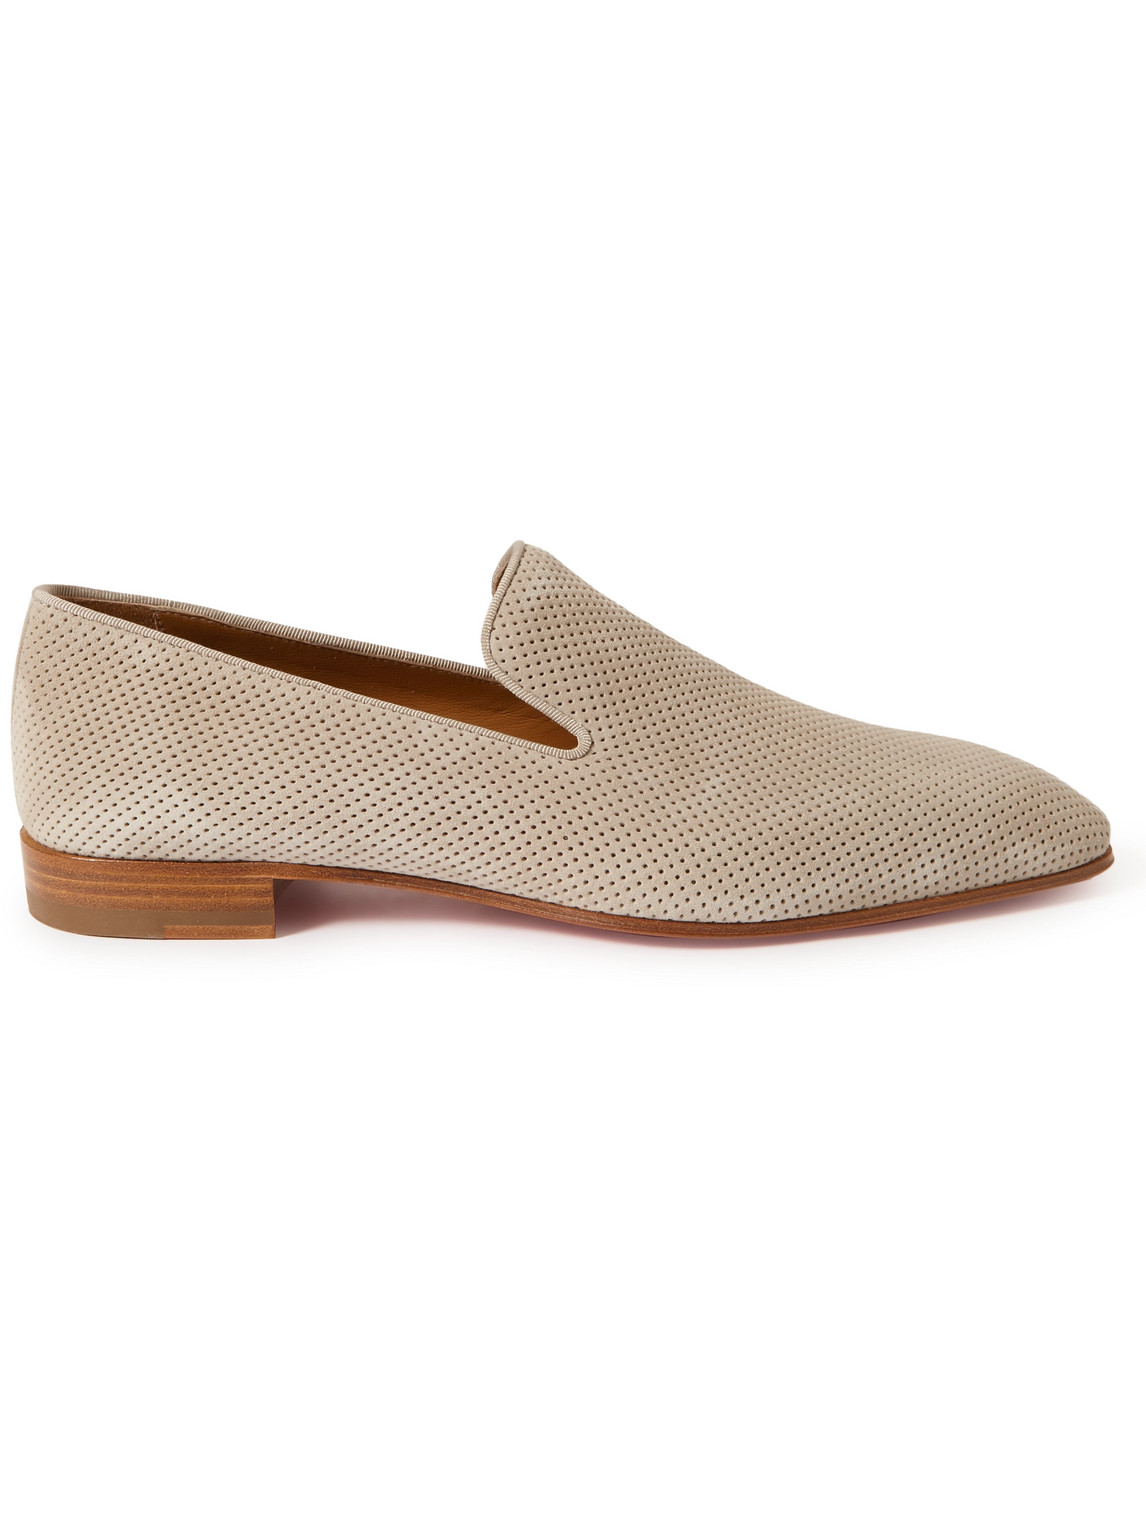 Christian Louboutin Dandelion Perforated Suede Loafers In Neutrals